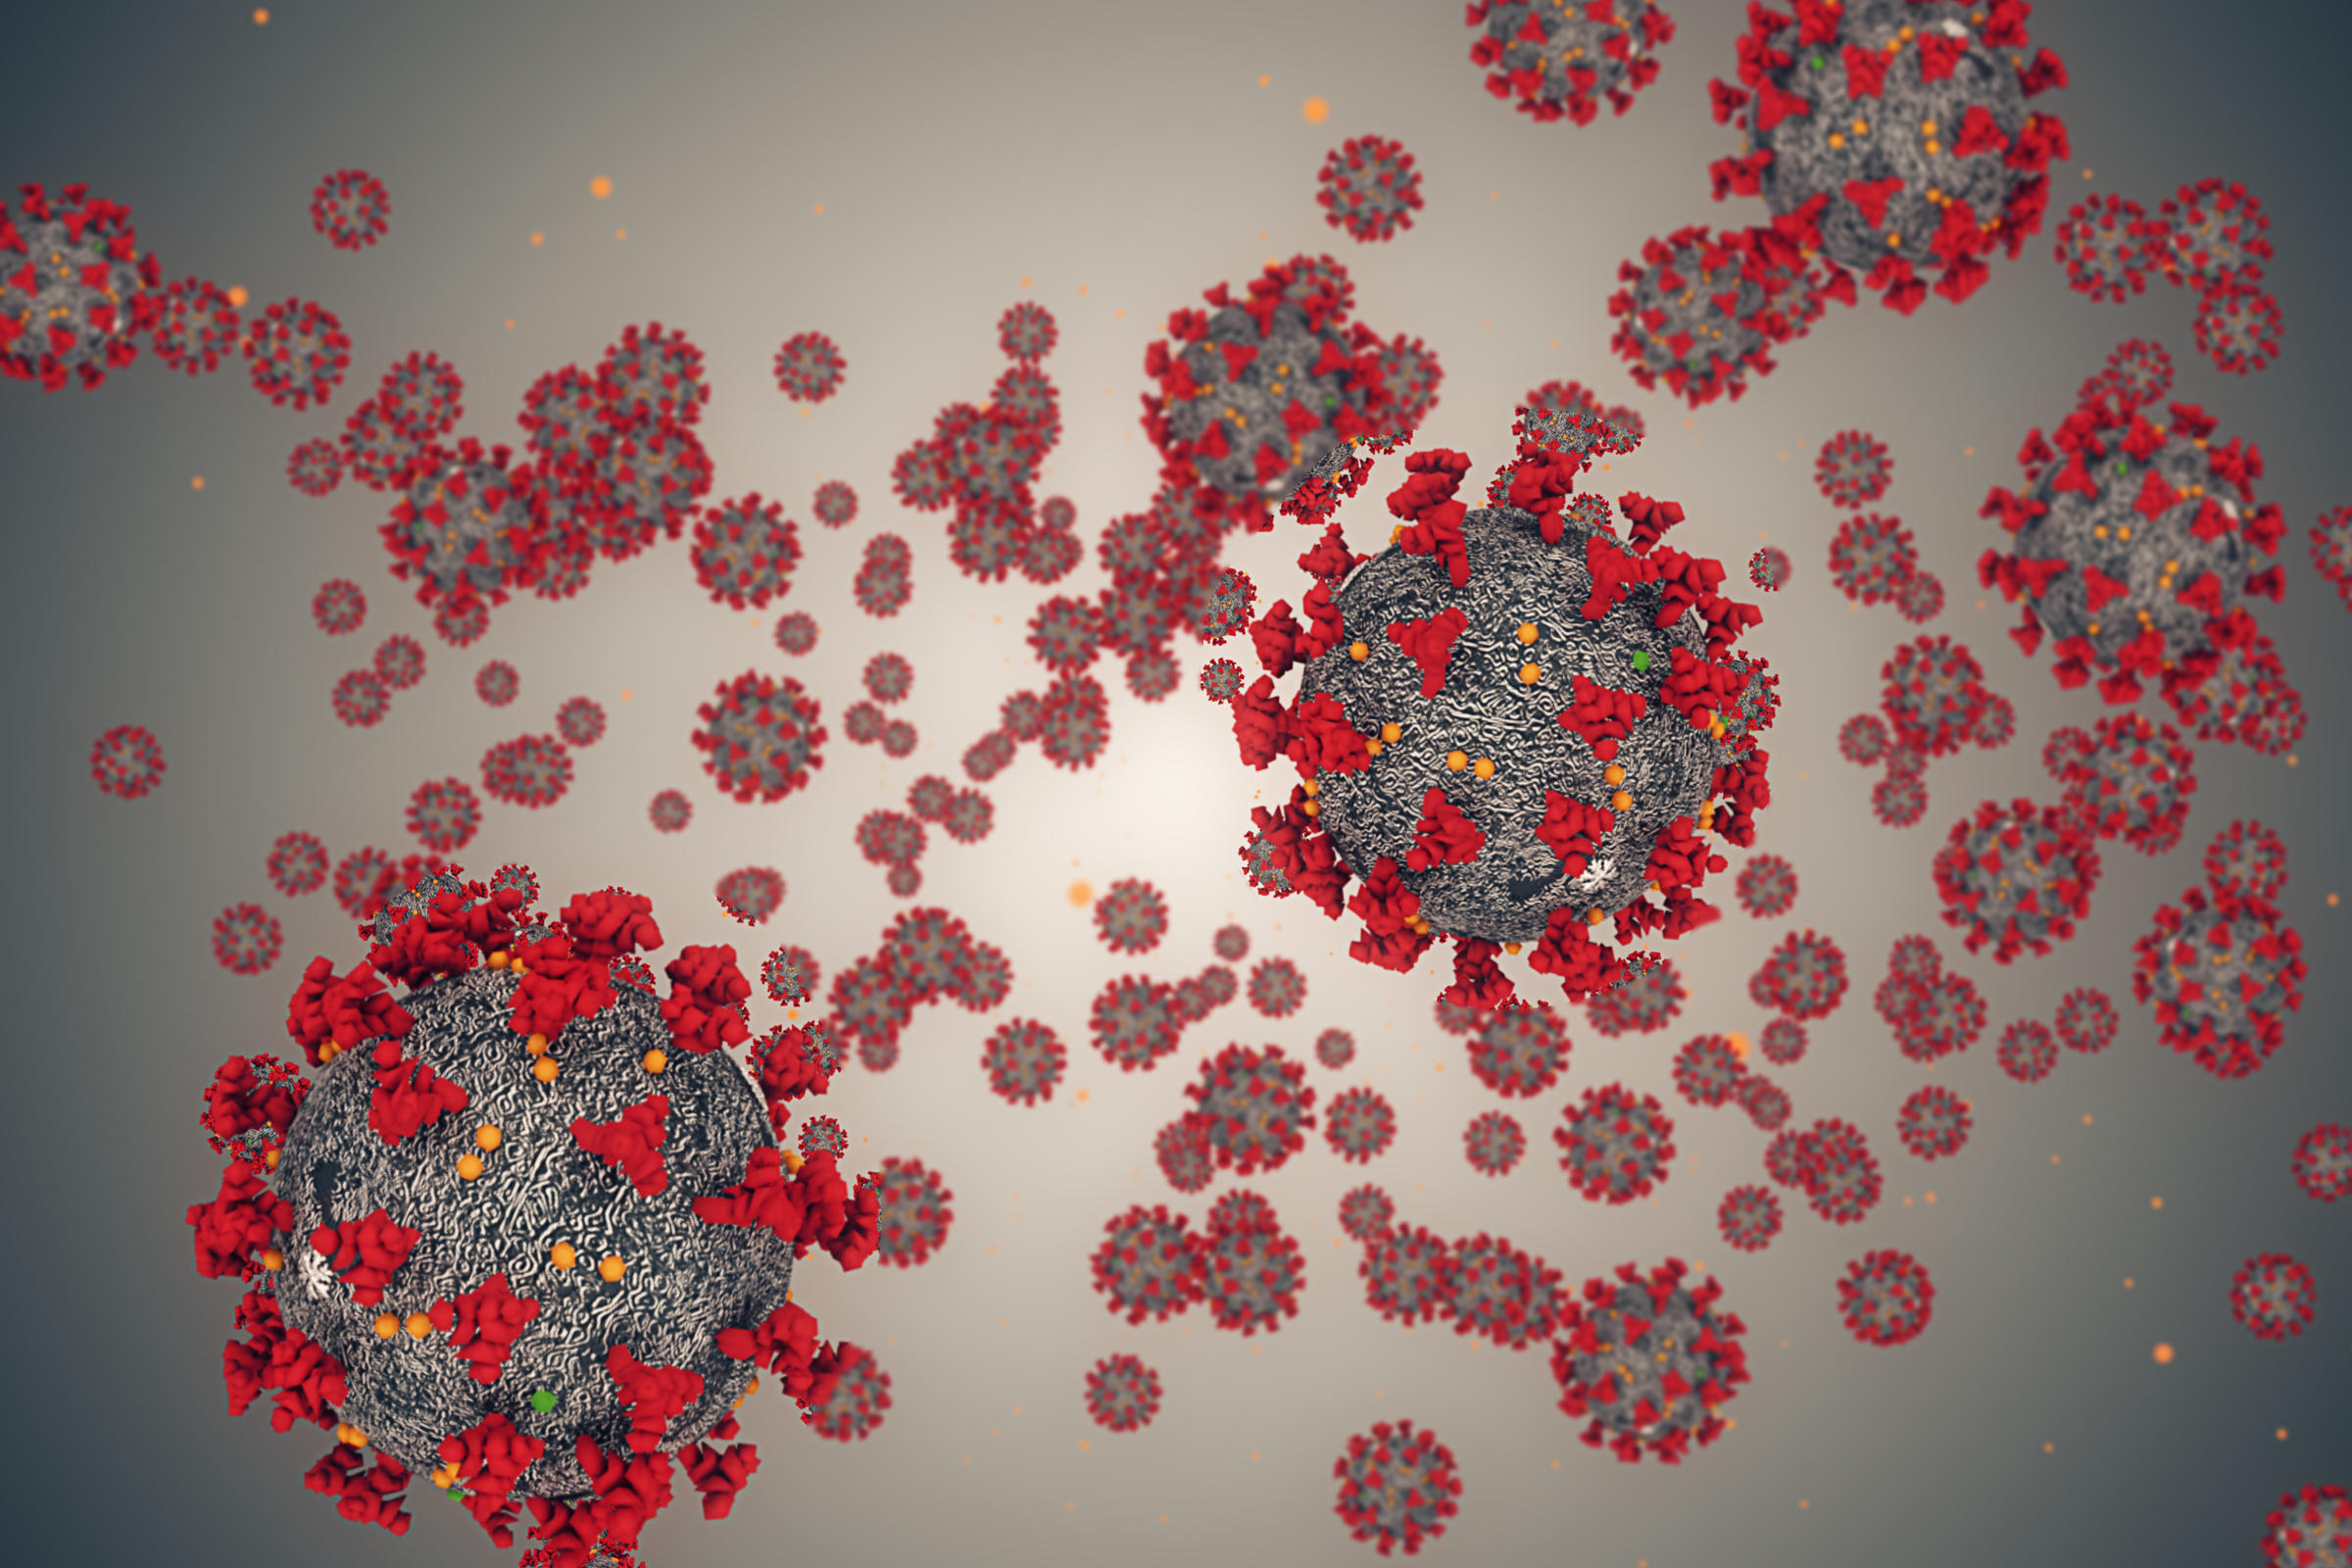 3d Rendering, Coronavirus Cells Covid 19 Influenza Flowing On Grey Gradient Background As Dangerous Flu Strain Cases As A Pandemic Medical Health Risk Concept Of Disease Cells Risk